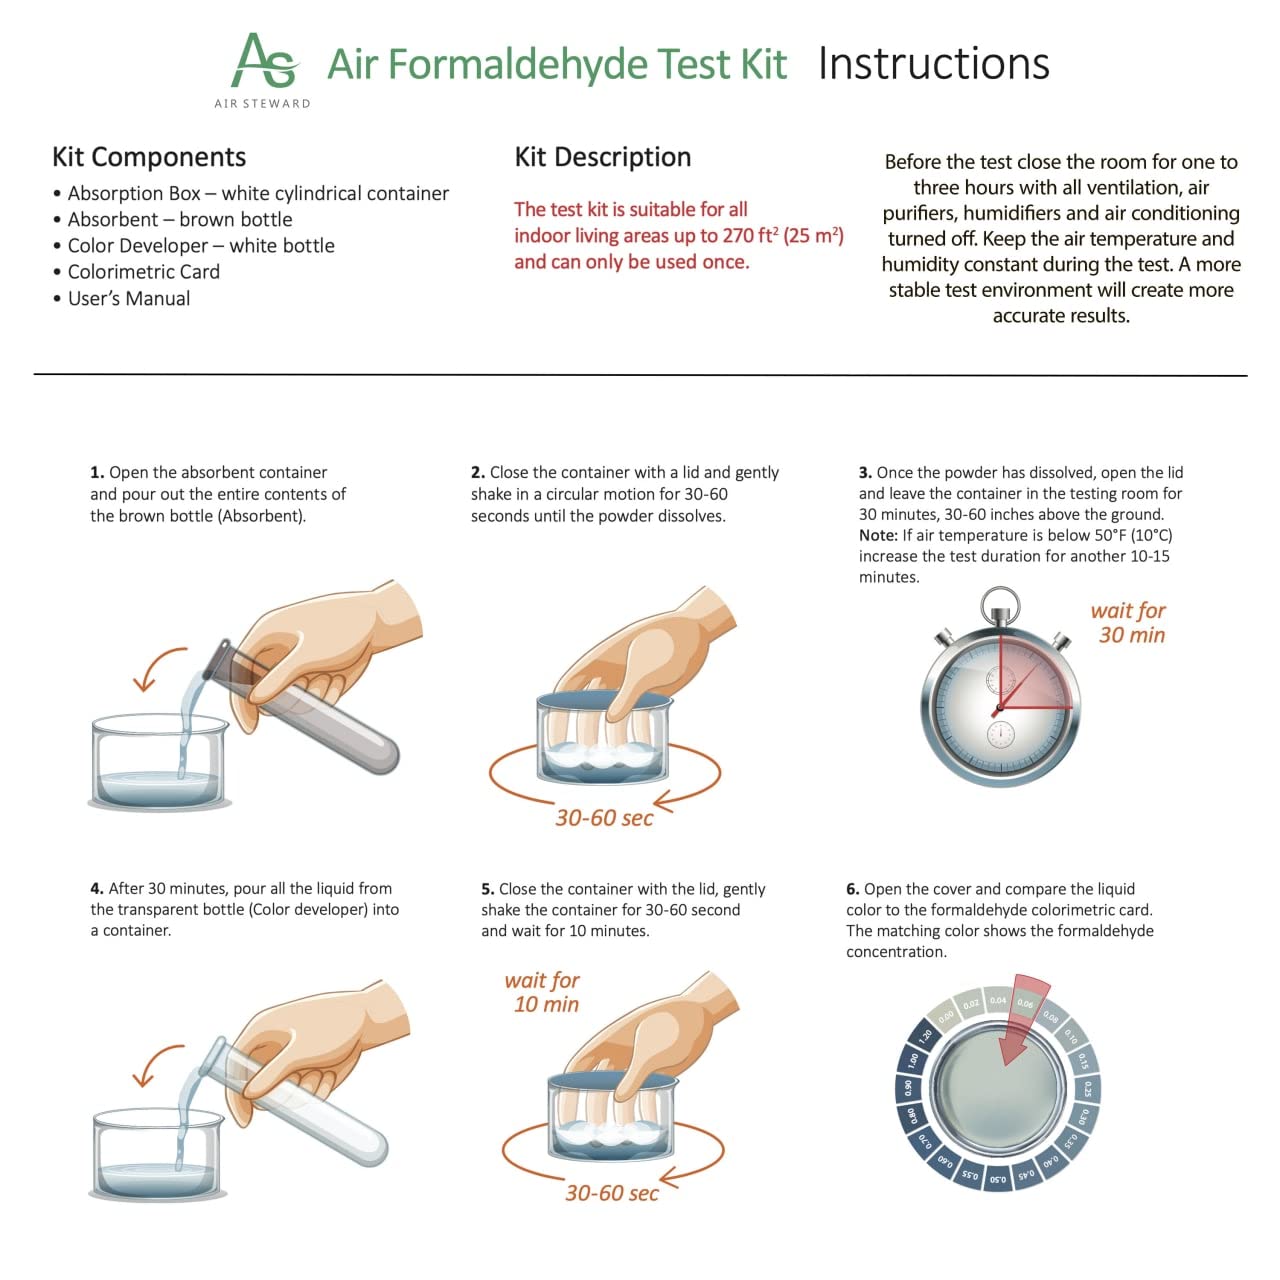 Air Formaldehyde (HCHO) DIY Test kit - Know What's in The Air That Surrounds You (Pack of 1)